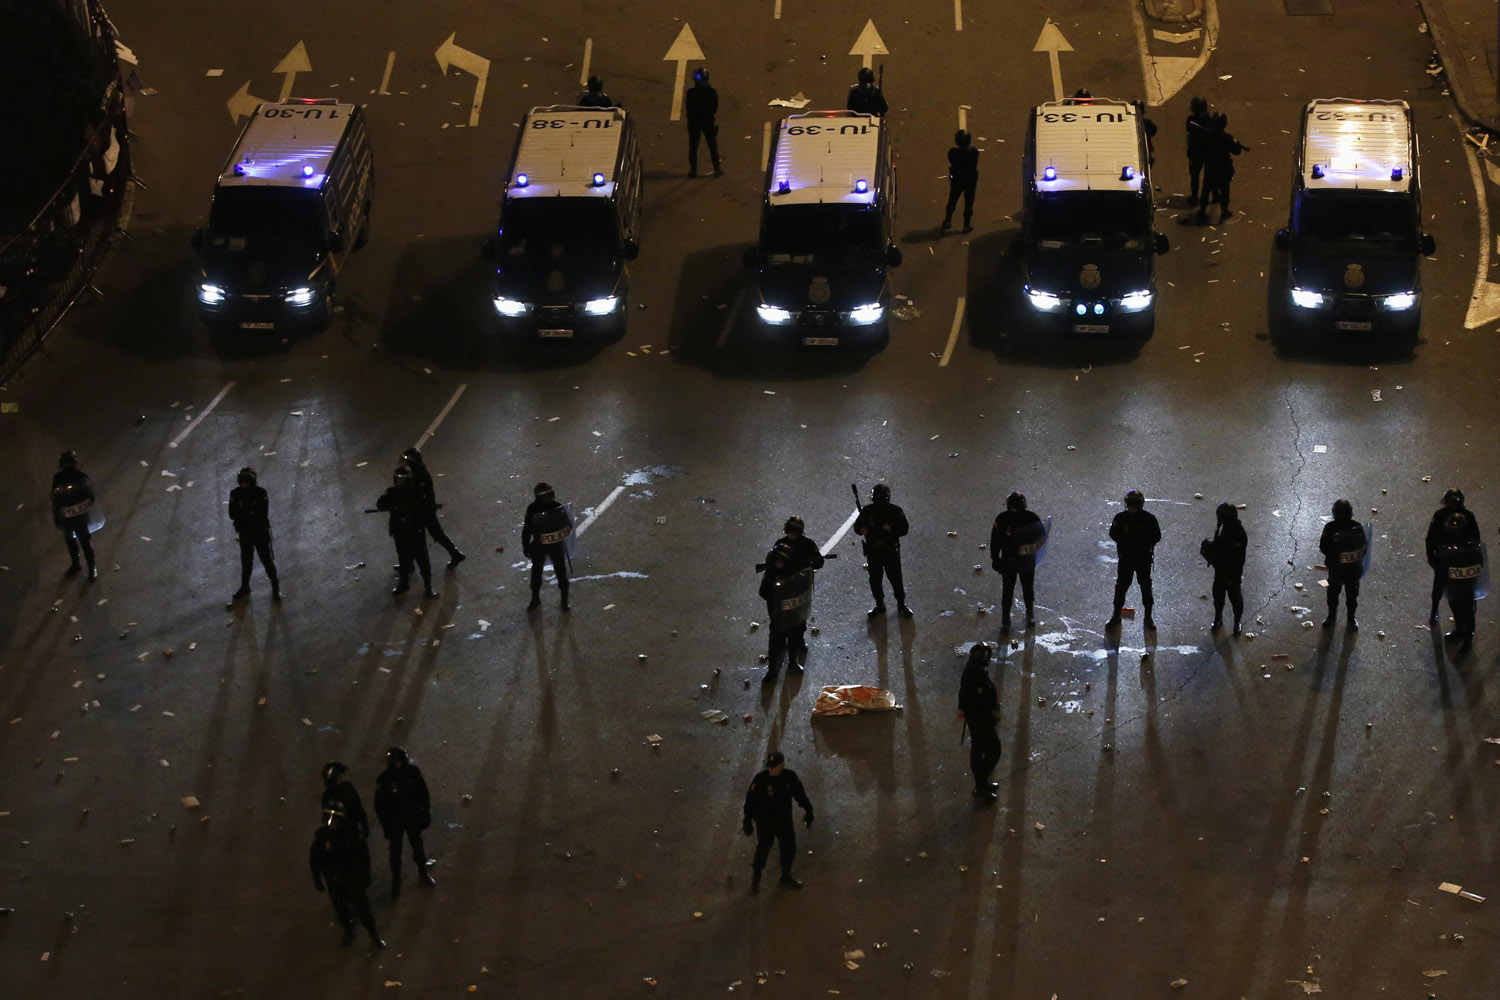 Feb. 23, 2013. Riot police stand in line during a protest against austerity, near the parliament in Madrid, Spain.